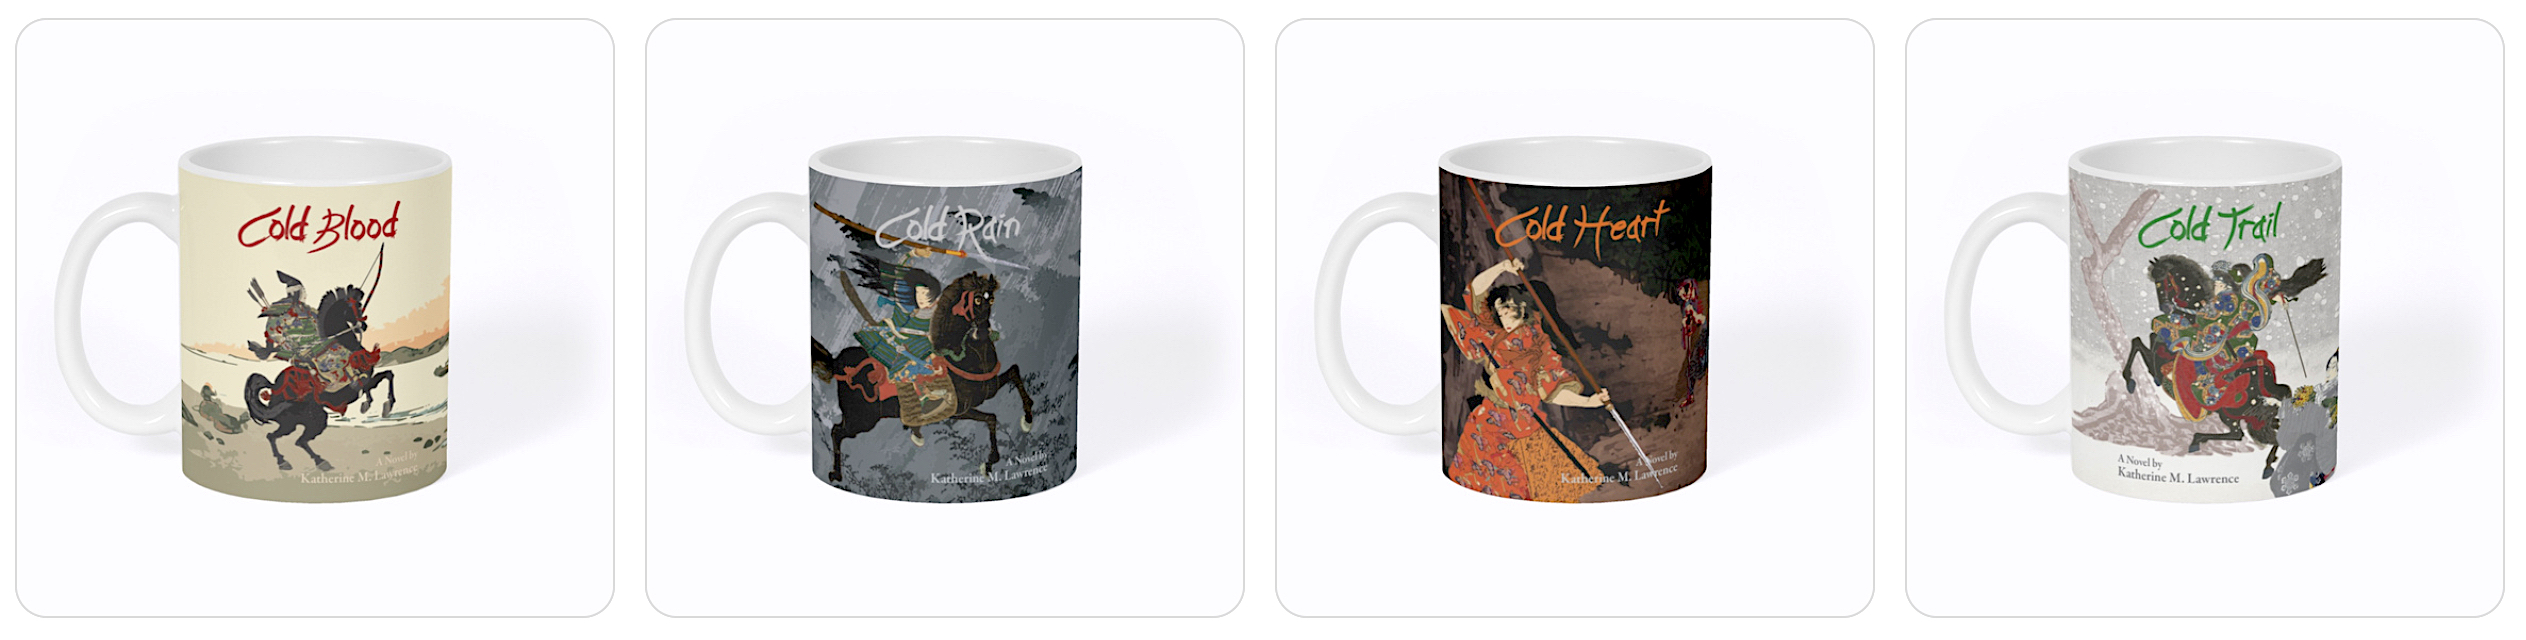 Four coffee mugs, each with a title over an image of a woman samurai: COLD BLOOD, with woman samurai in armor on rearing black horse on a beach; COLD RAIN, with woman samurai on a black horse galloping through rain; COLD HEART, with a woman samurai wielding a polearm on a road blocked by a bloody man; COLD TRAIL, with a woman samurai on rearing horse in snow, with a woman in kimono pointing where to go.